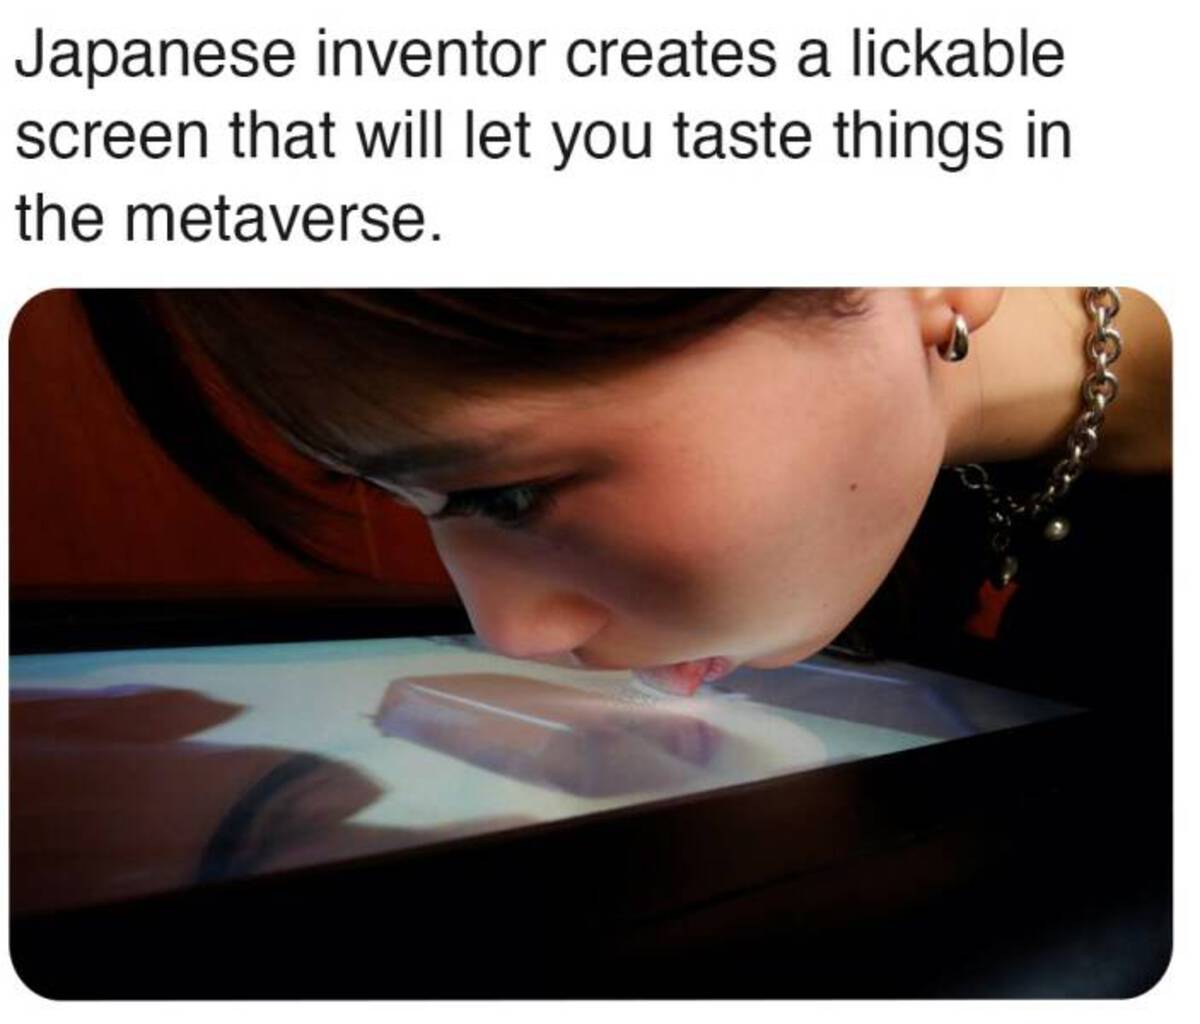 licking tv - Japanese inventor creates a lickable screen that will let you taste things in the metaverse.